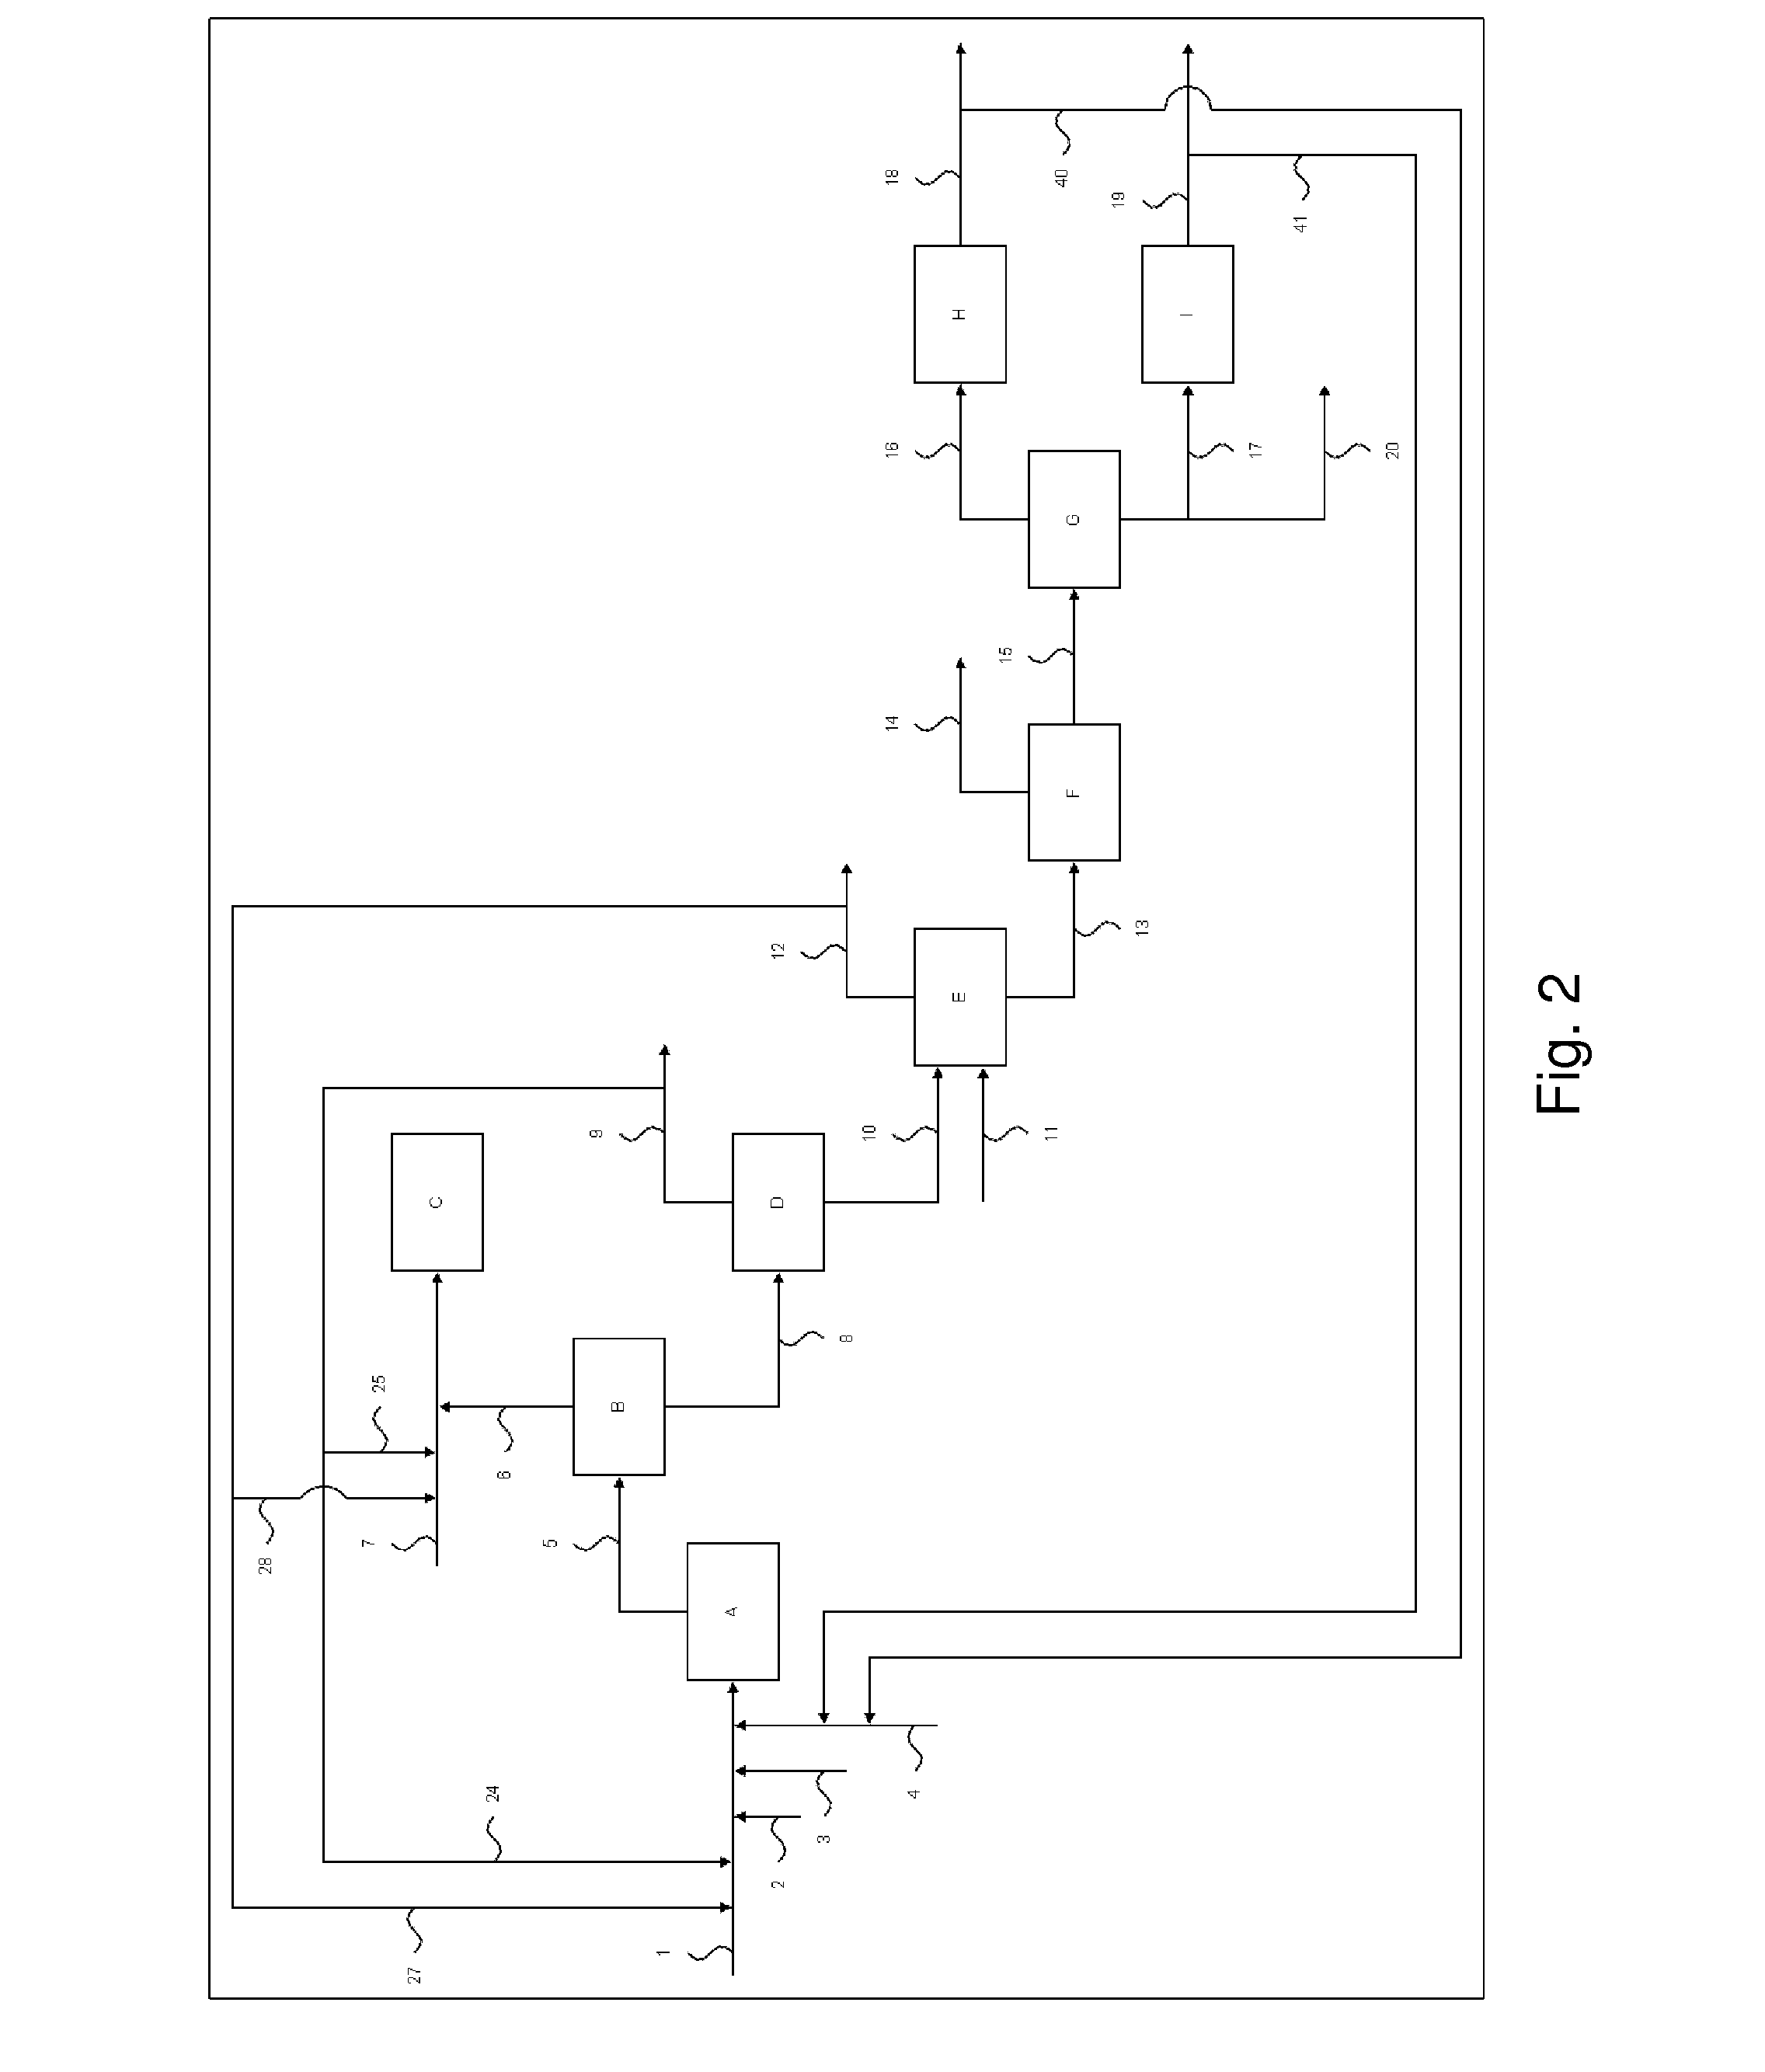 Method for the hydroconversion of oil feedstocks using slurry technology, allowing the recovery of metals from the catalyst and the feedstock, comprising an extraction step